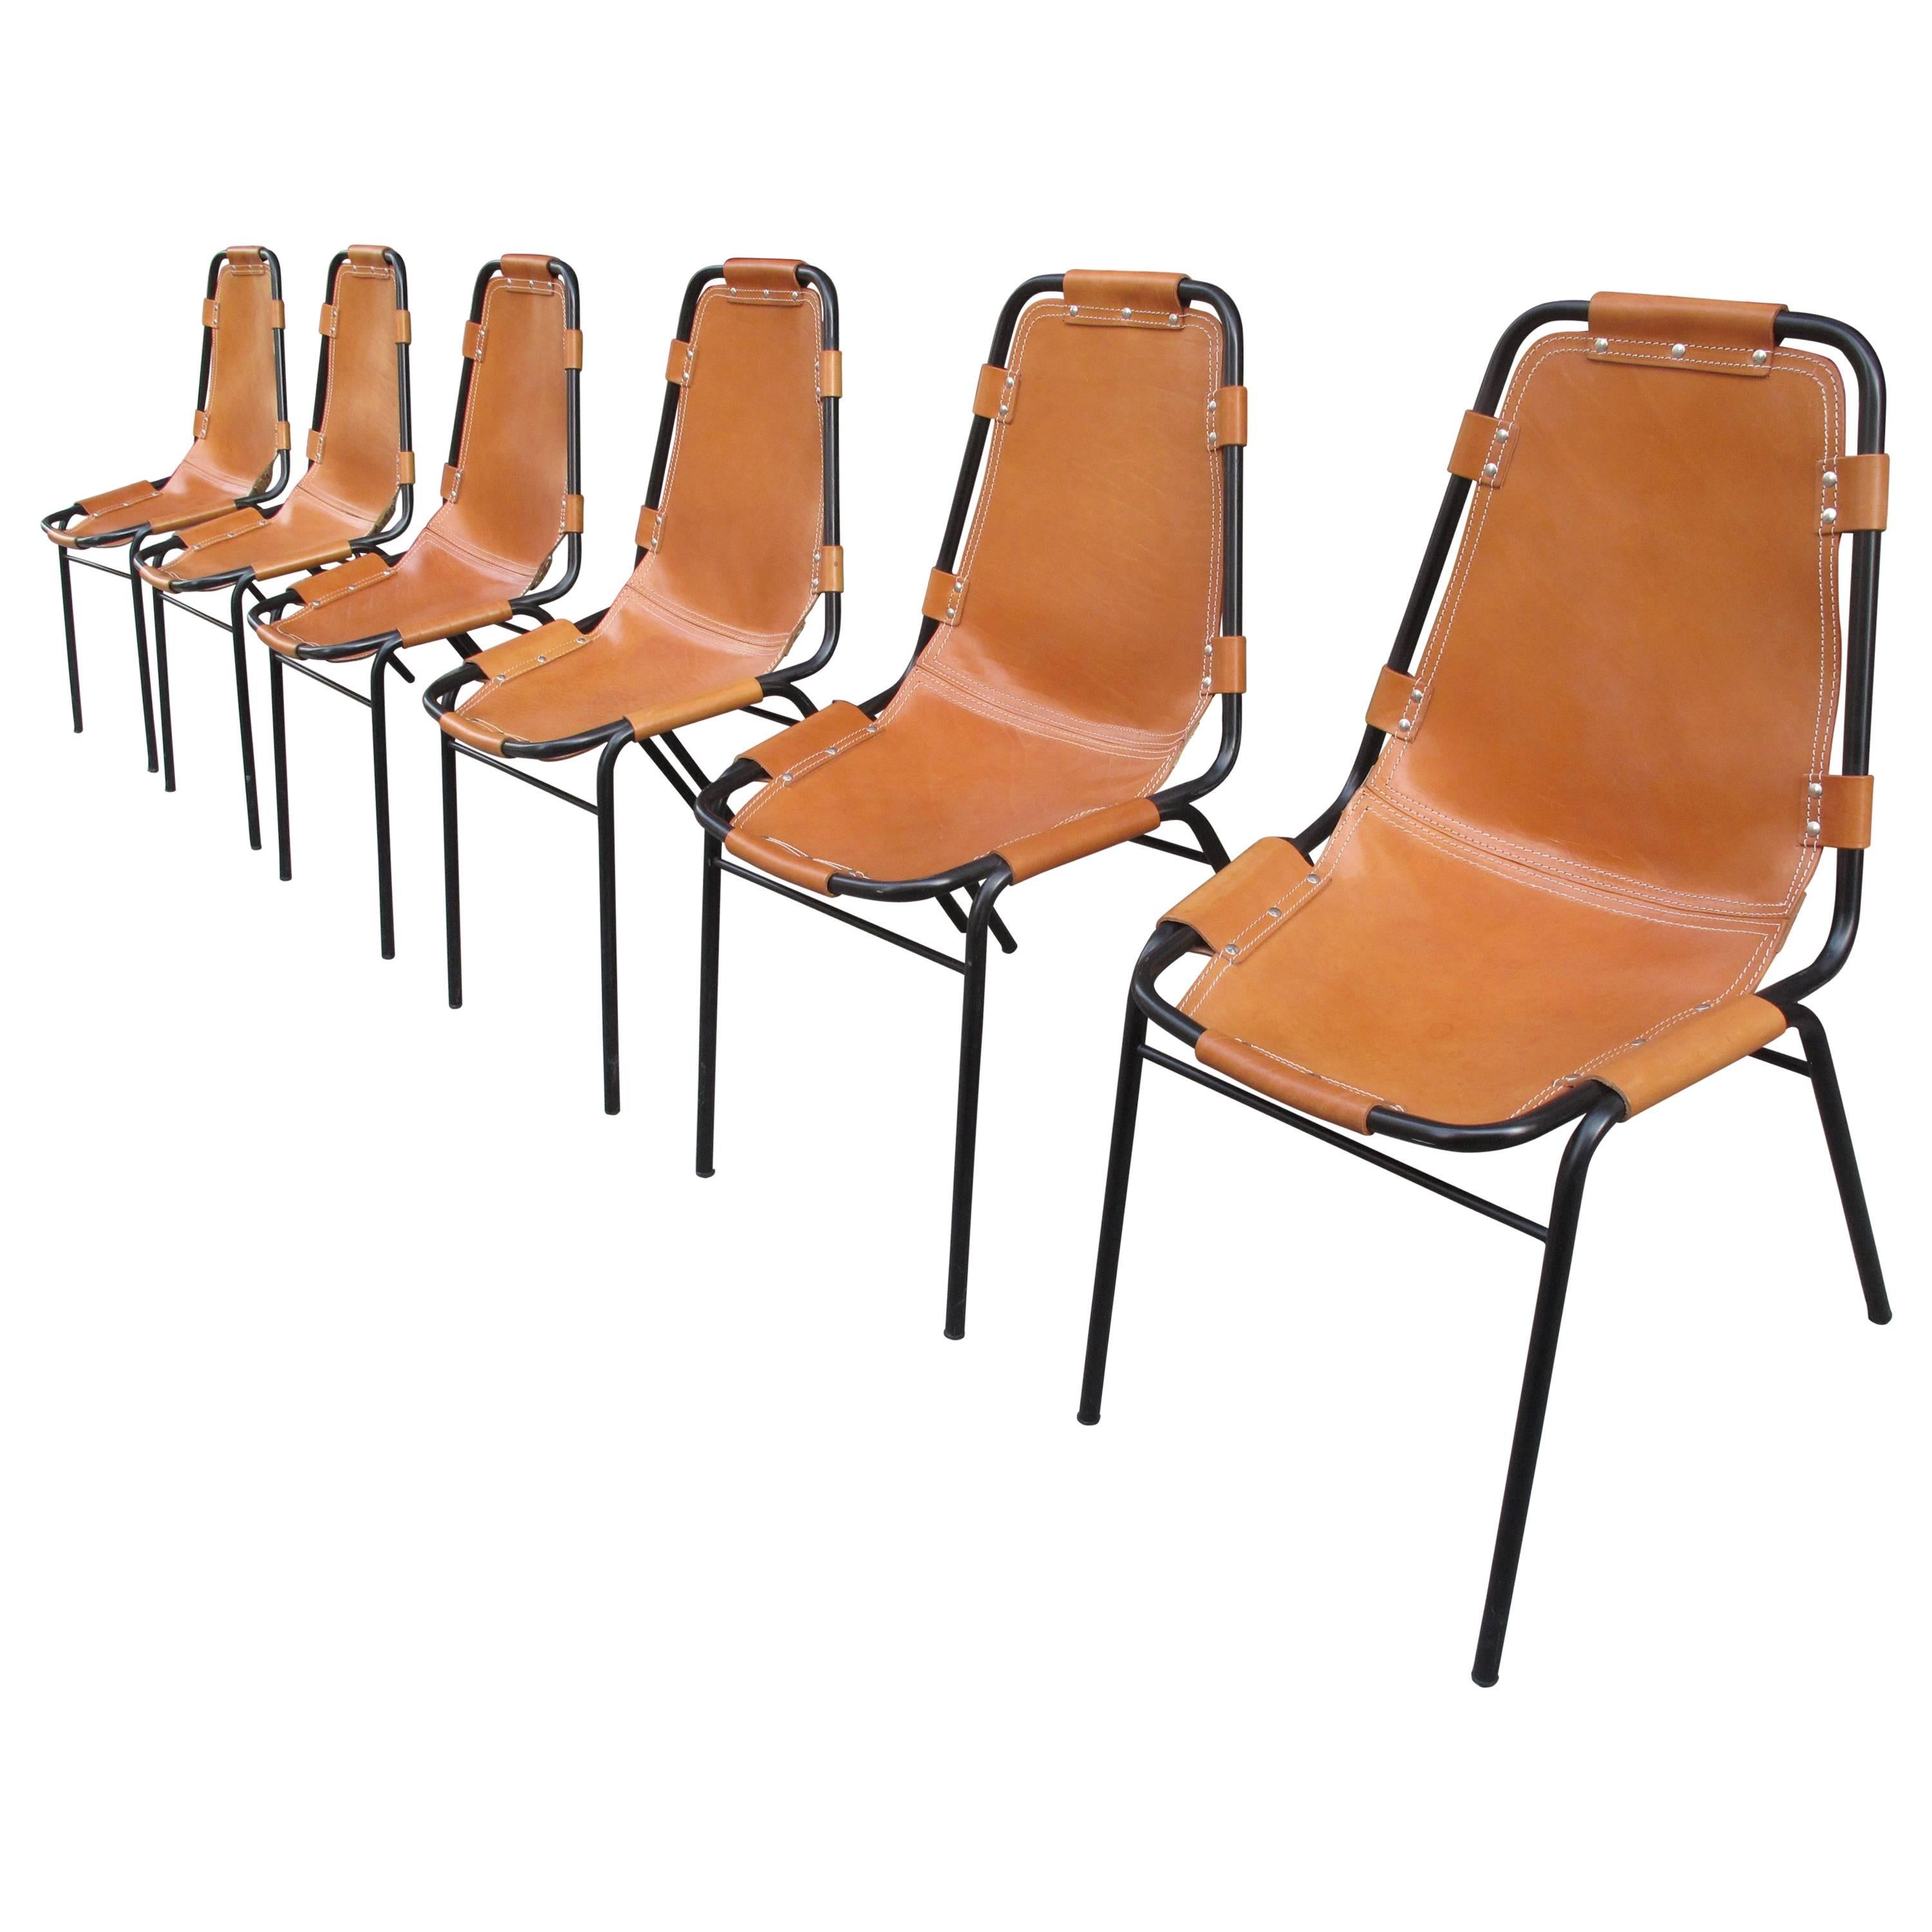 Charlotte Perriand a set of 6 leather chairs